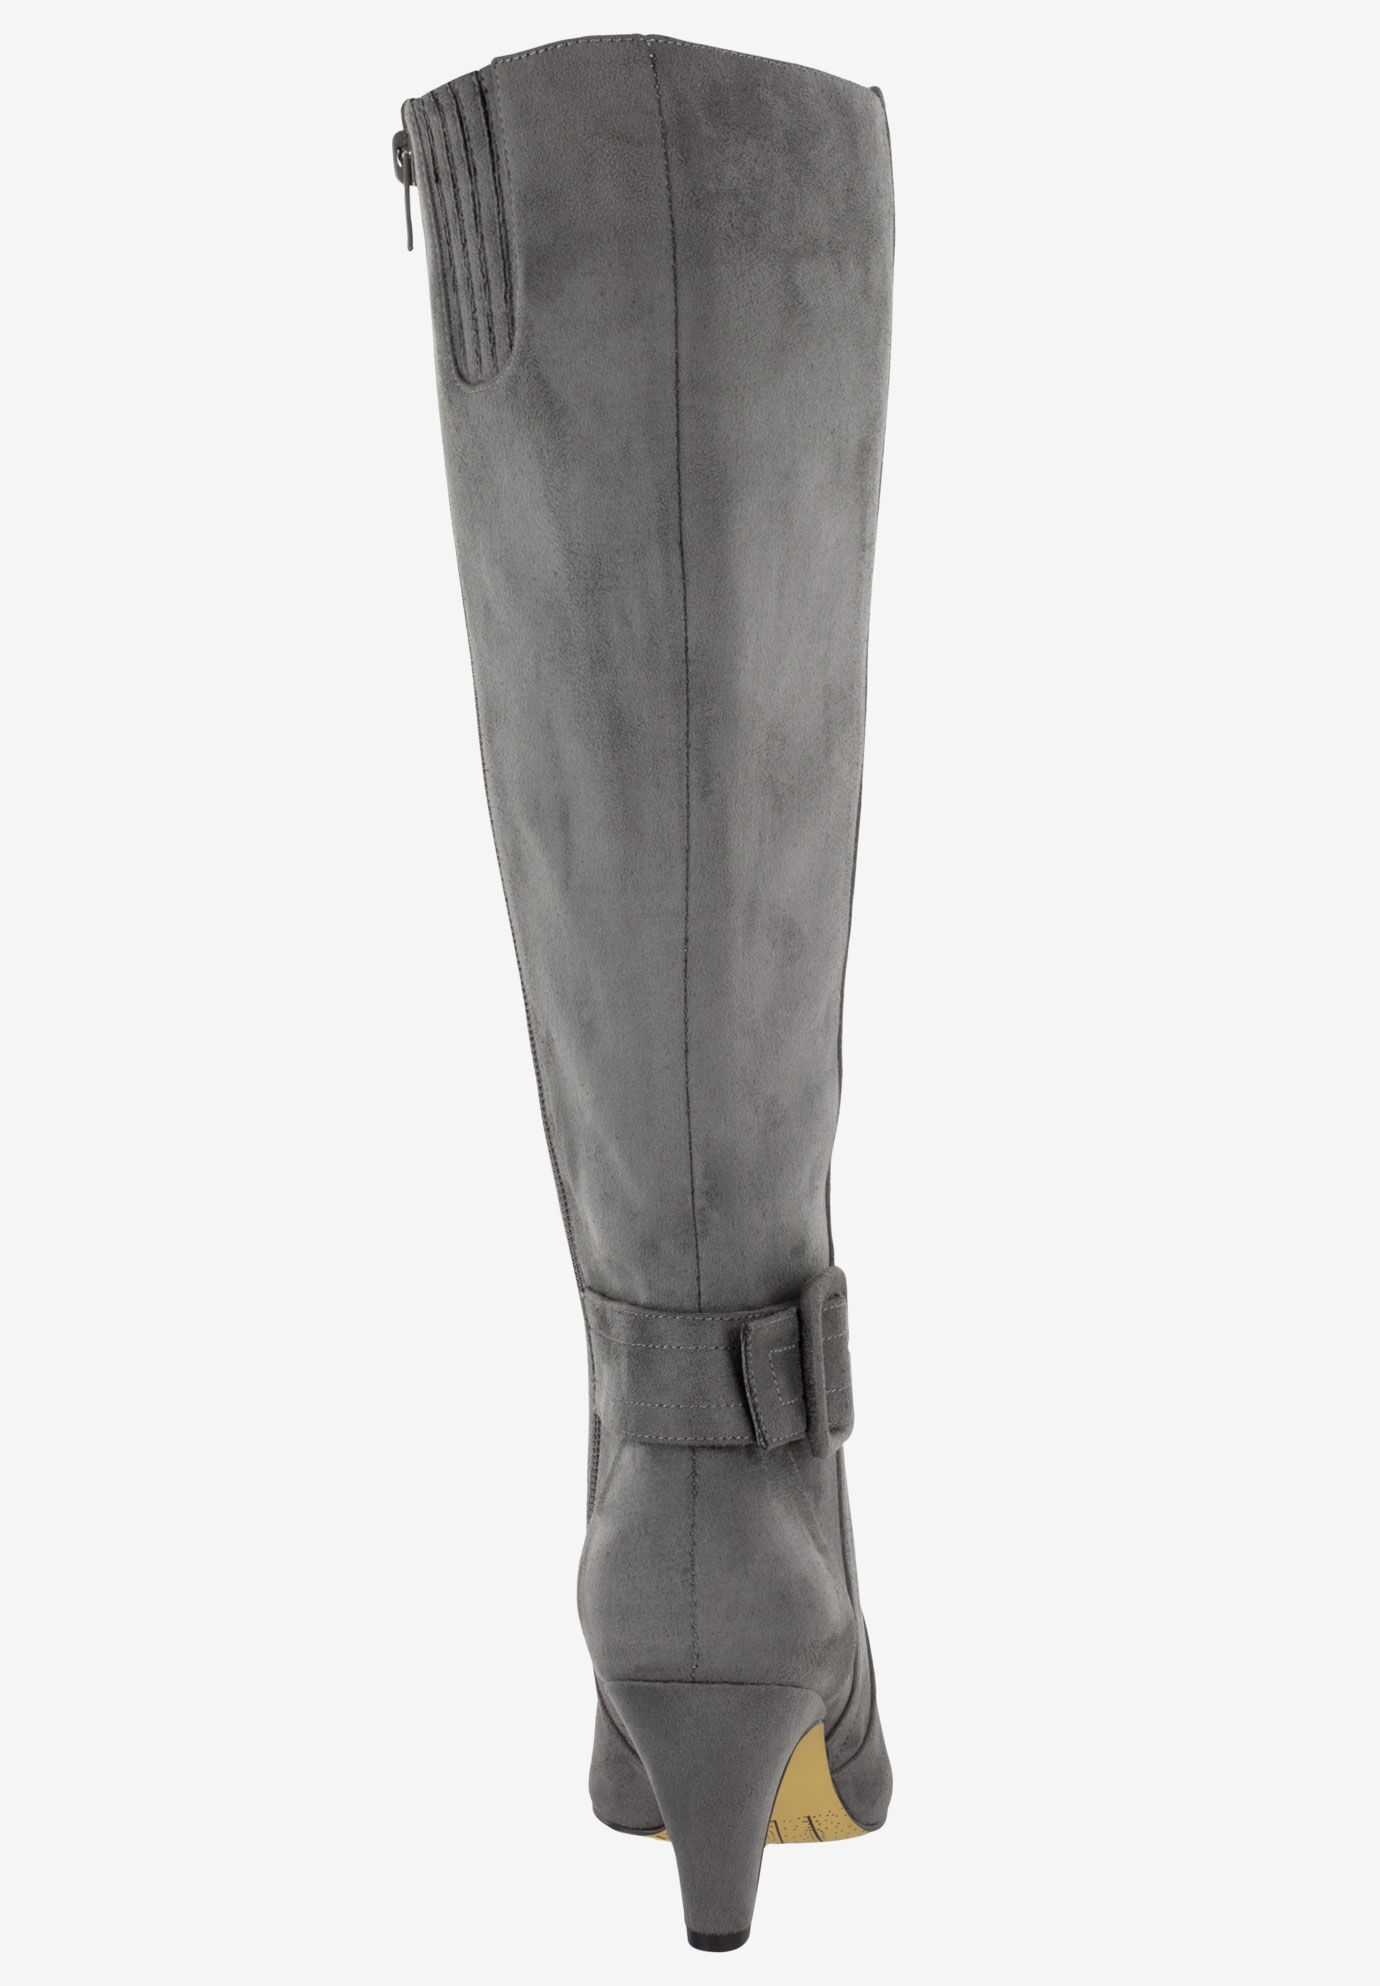 grey leather wide calf boots